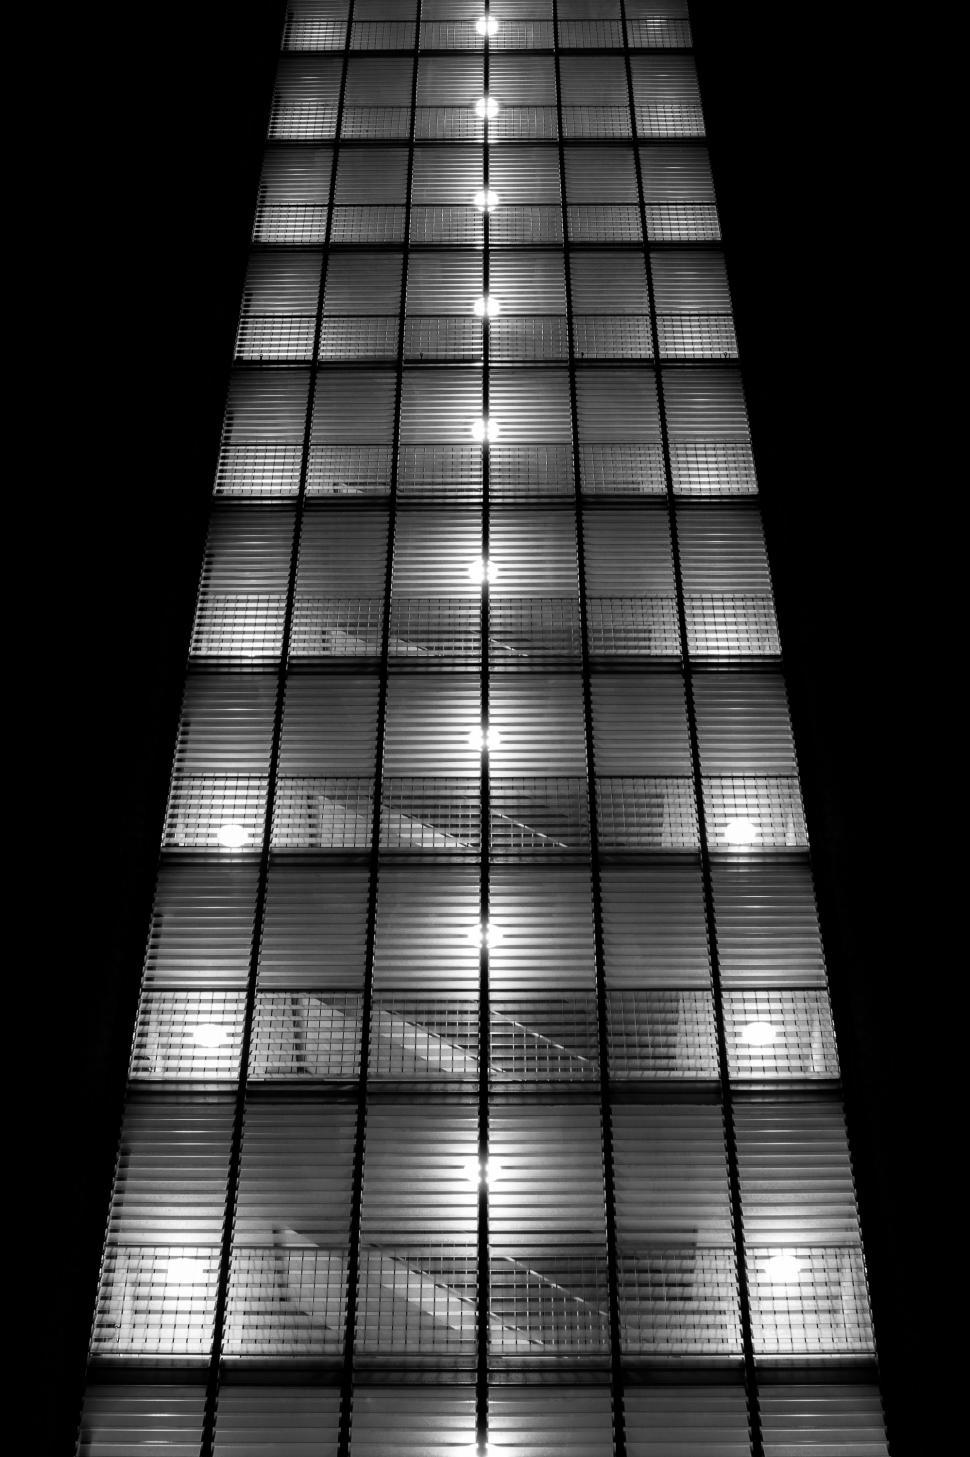 Free Image of Towering Skyscraper With Numerous Windows 